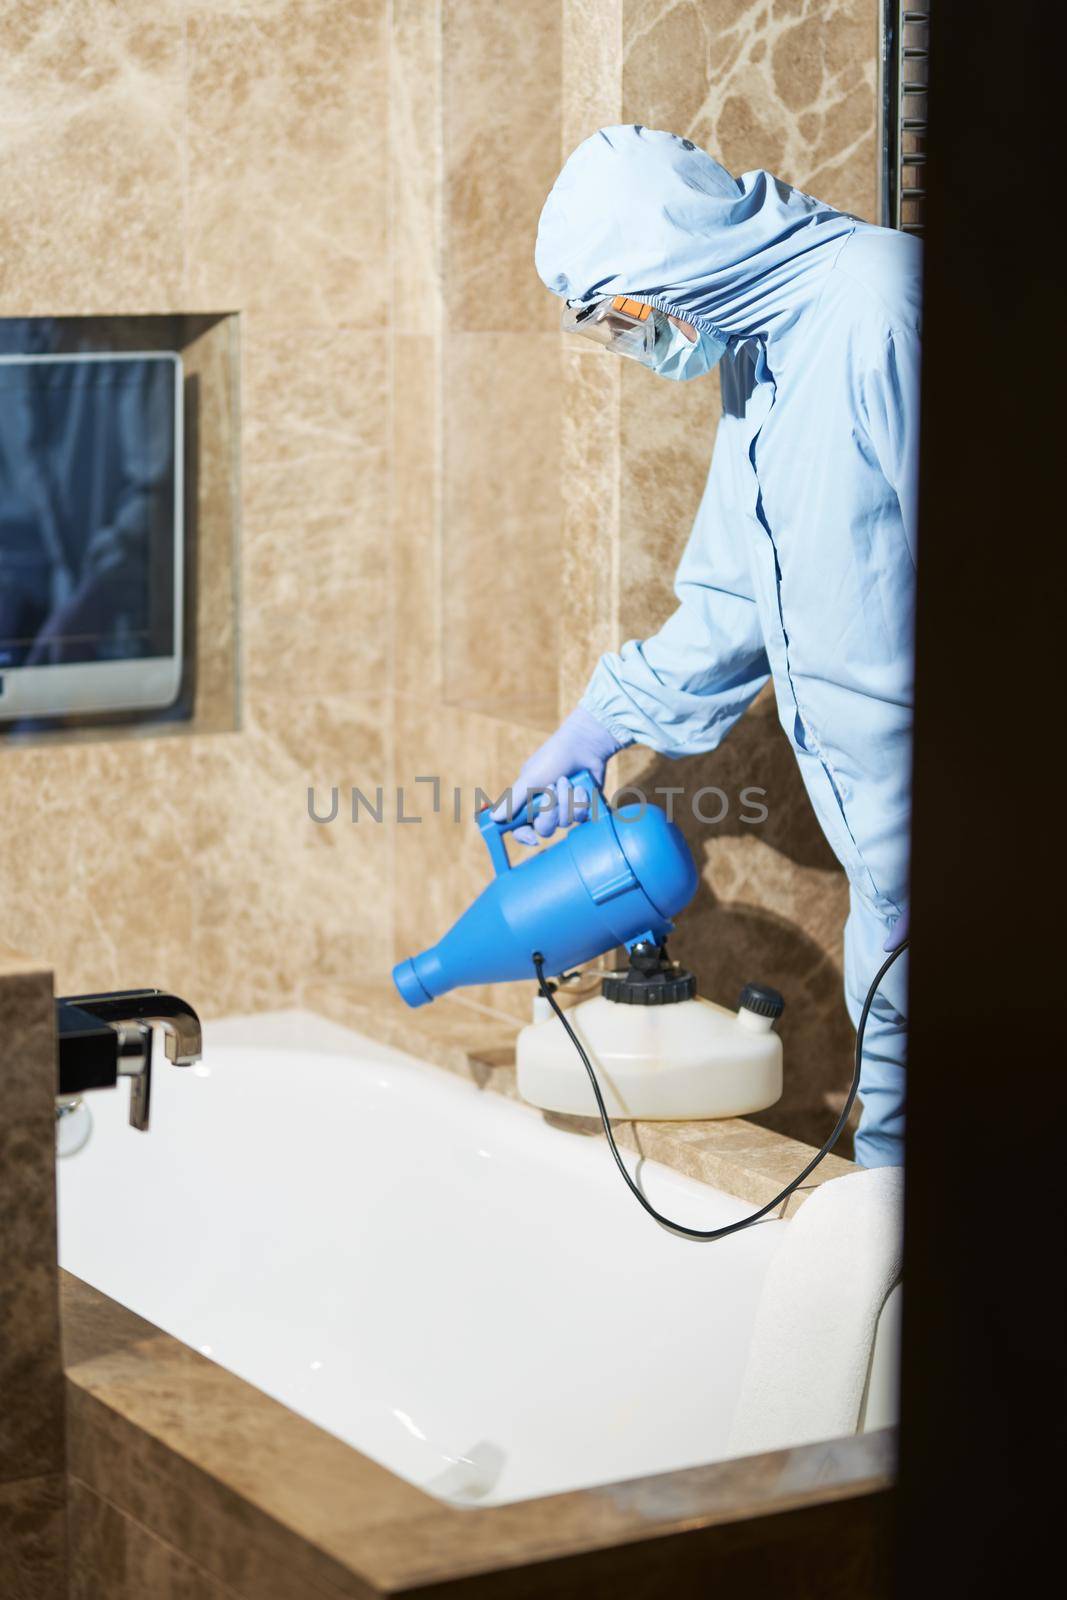 Technician in protective suit and glasses sanitizing a hotel bathroom by friendsstock